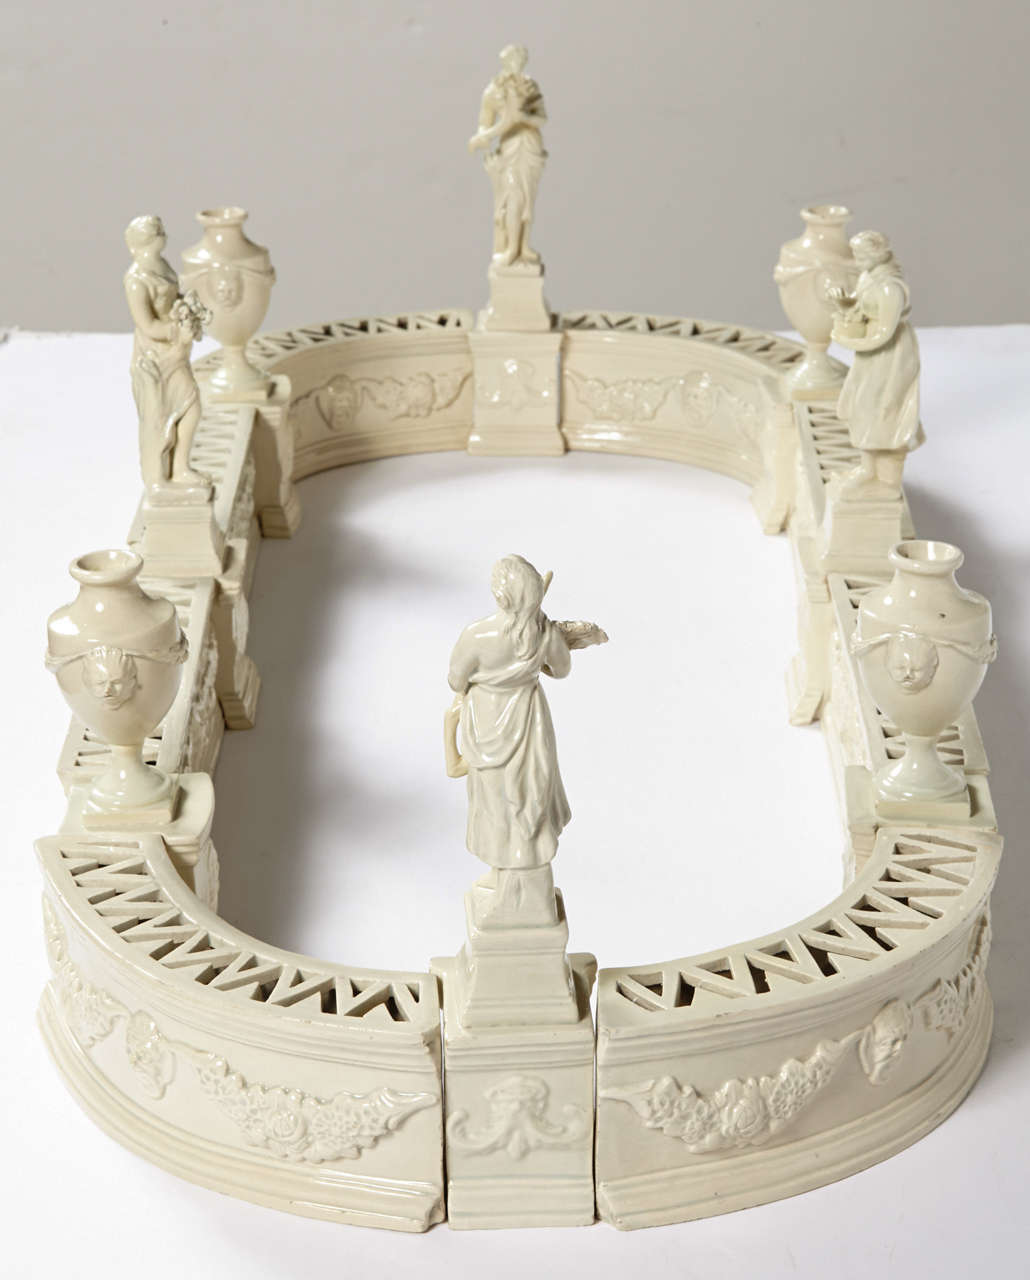 19th Century Italian Porcelain Centerpiece In Excellent Condition For Sale In Dallas, TX